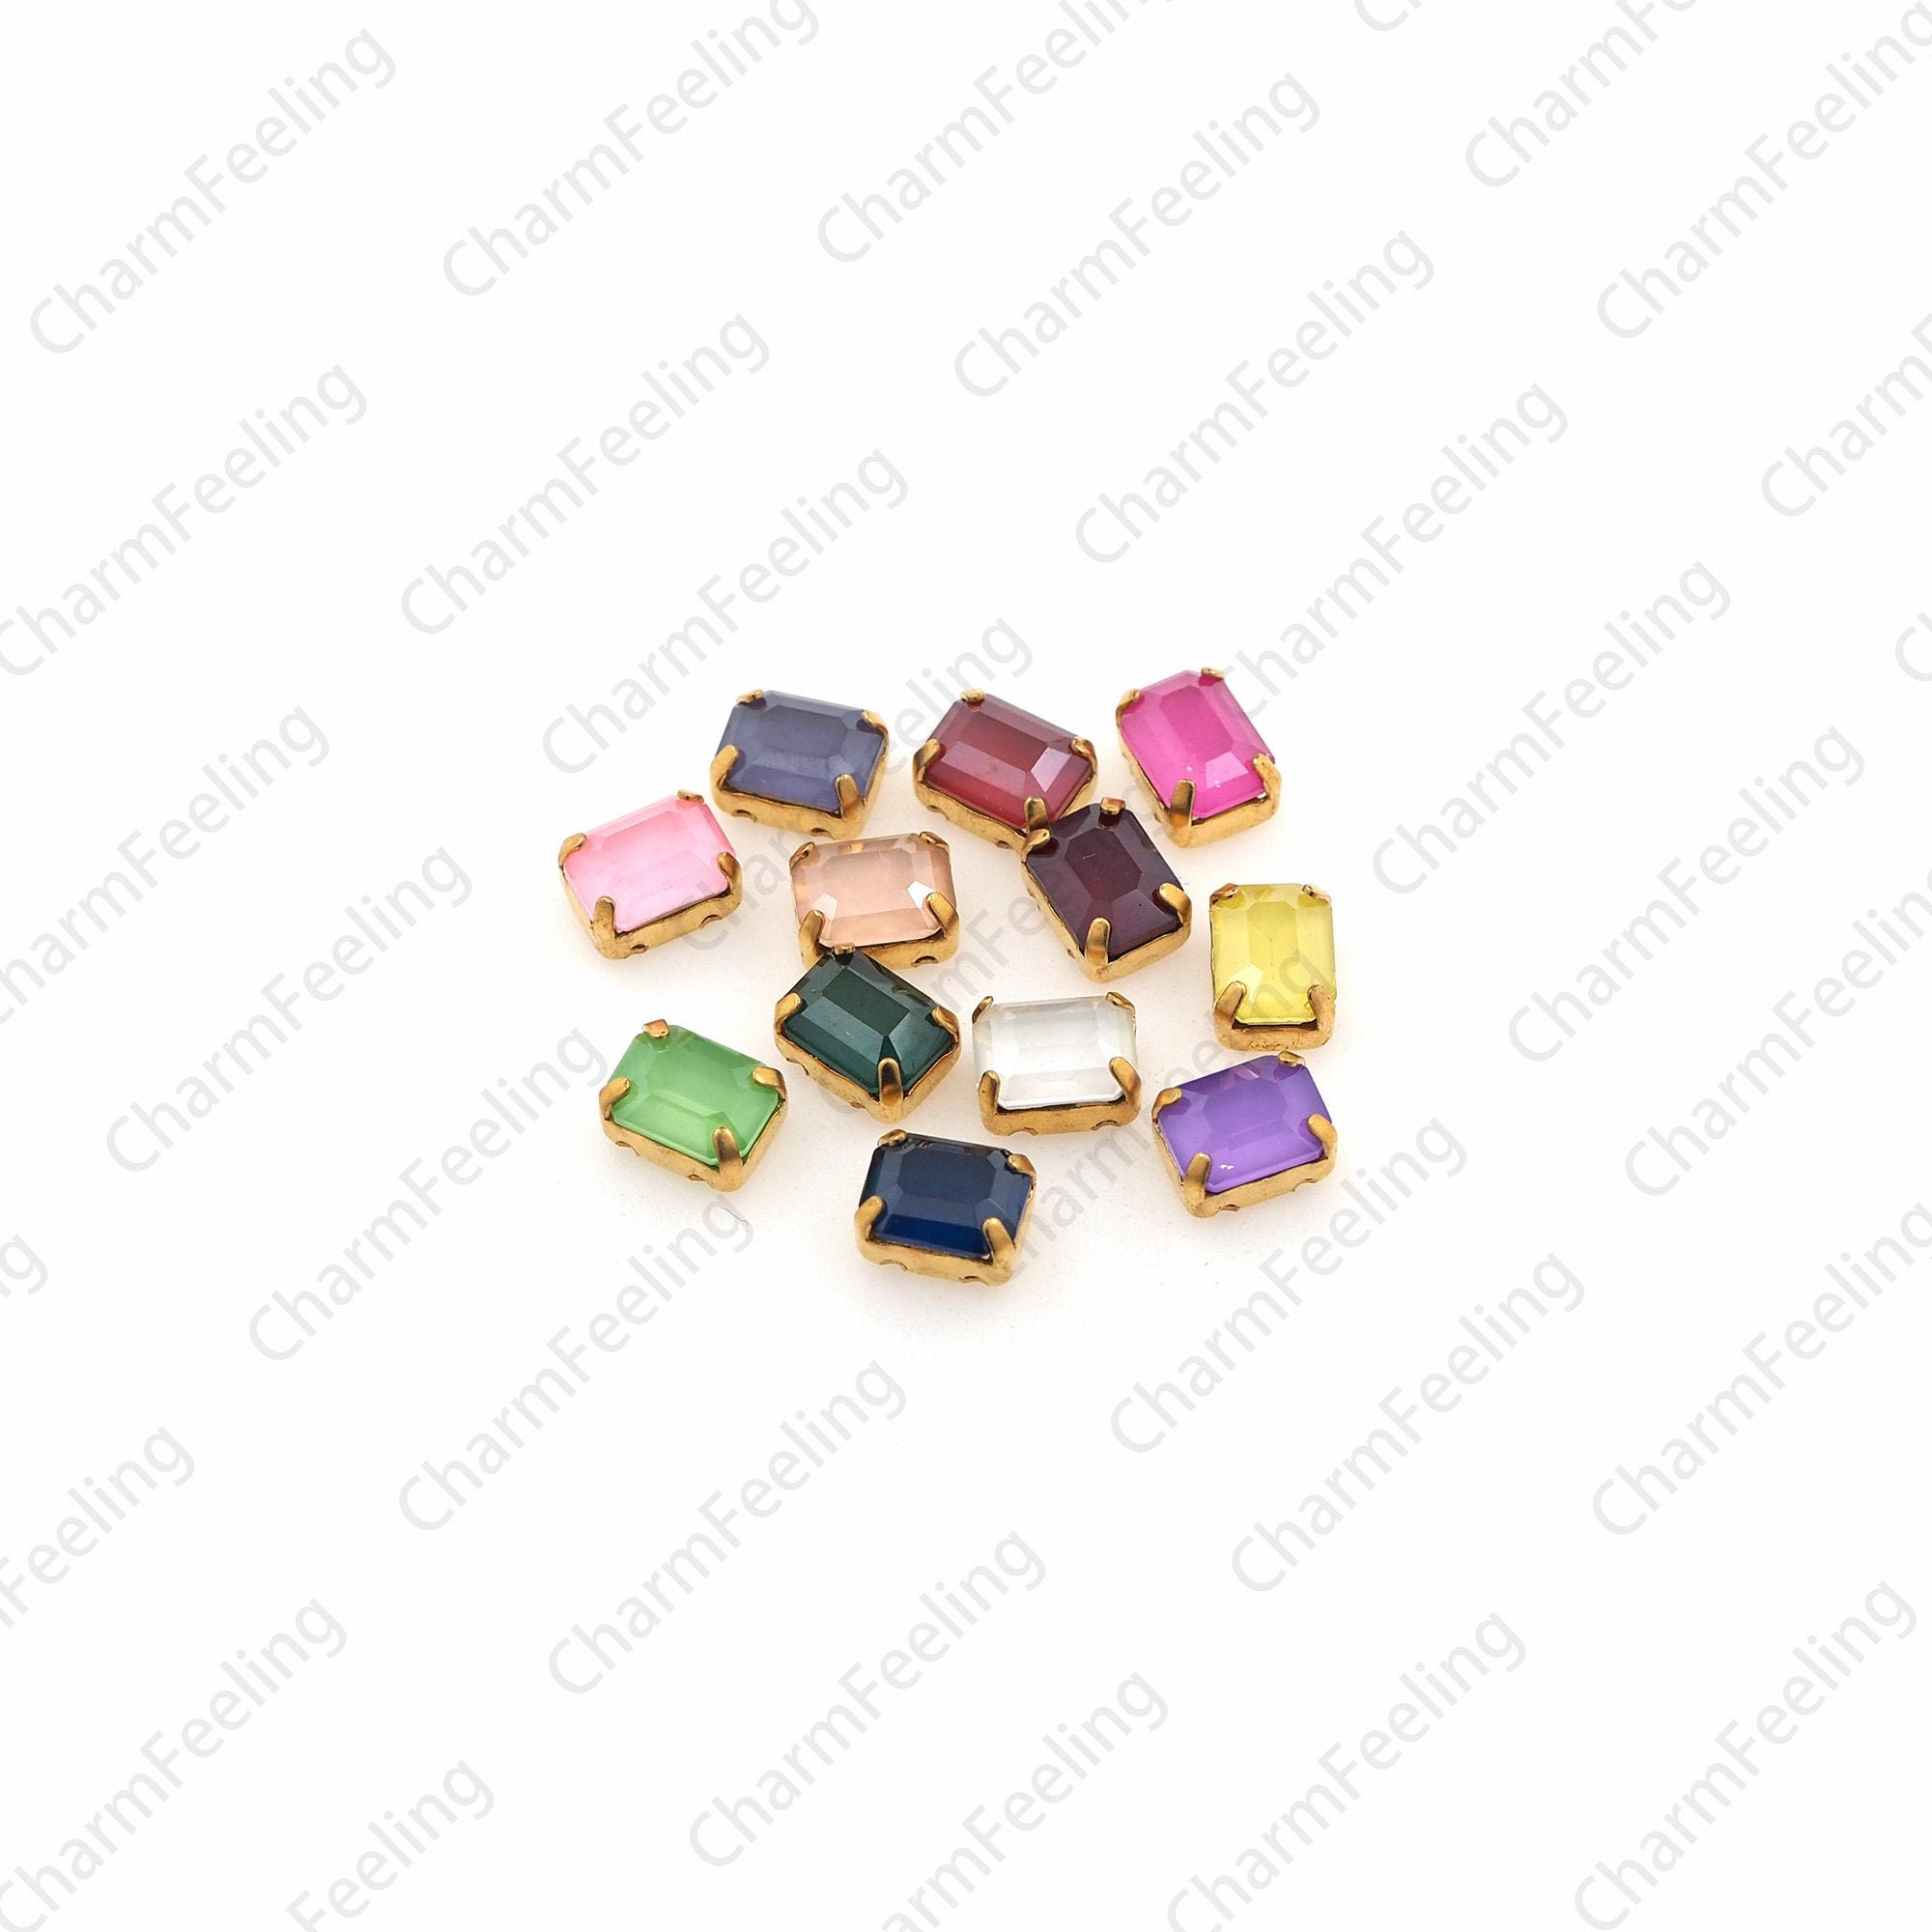 10Pcs, Rectangular Sewing Crystal With Golden Claws, Flat Back Rhinestone Glass Crystal, Diy Wedding Dress Jewelry Accessories 6x8mm